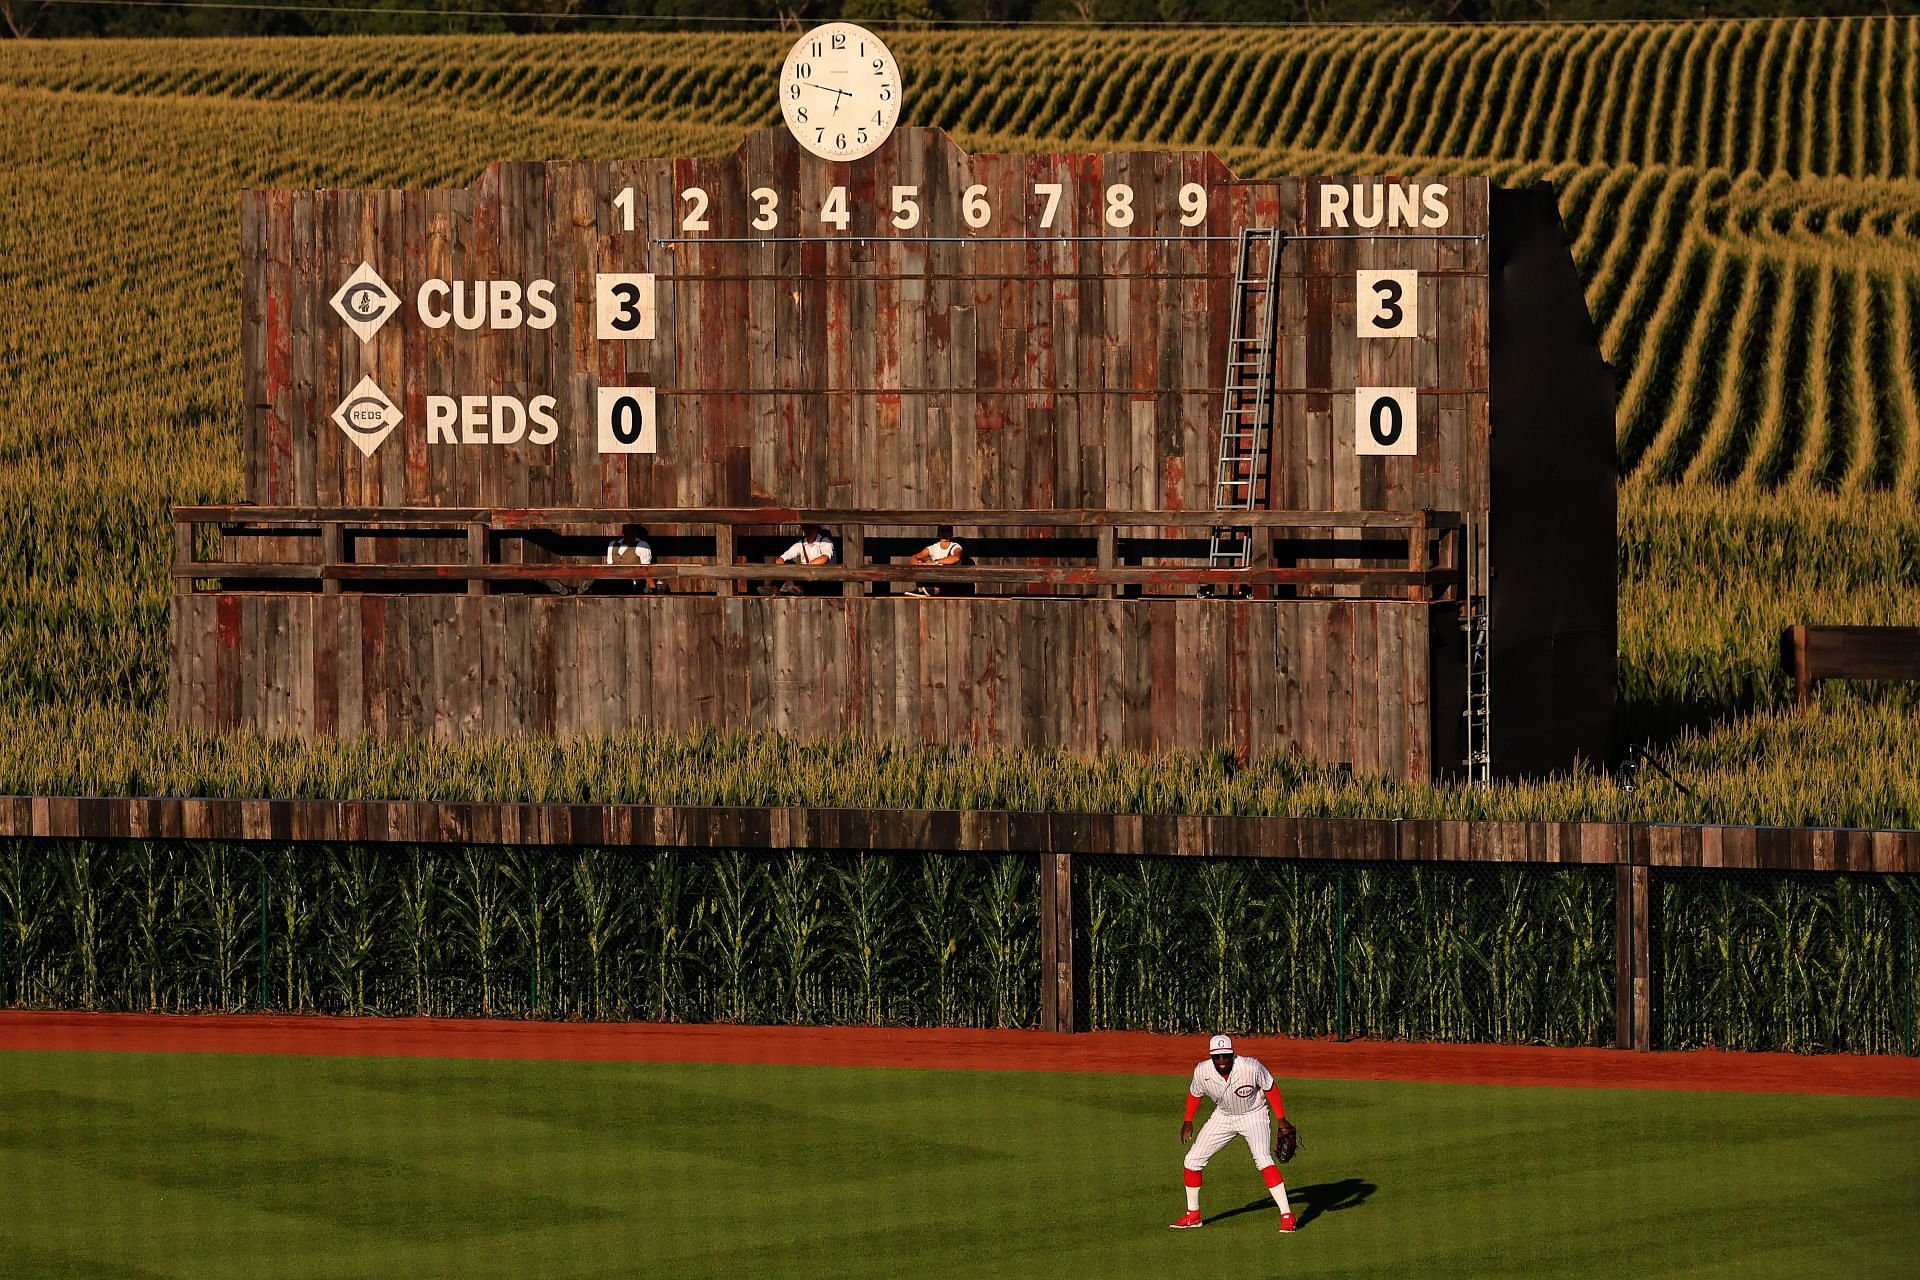 Reds & Cubs players and legends emerge from corn field at MLB at